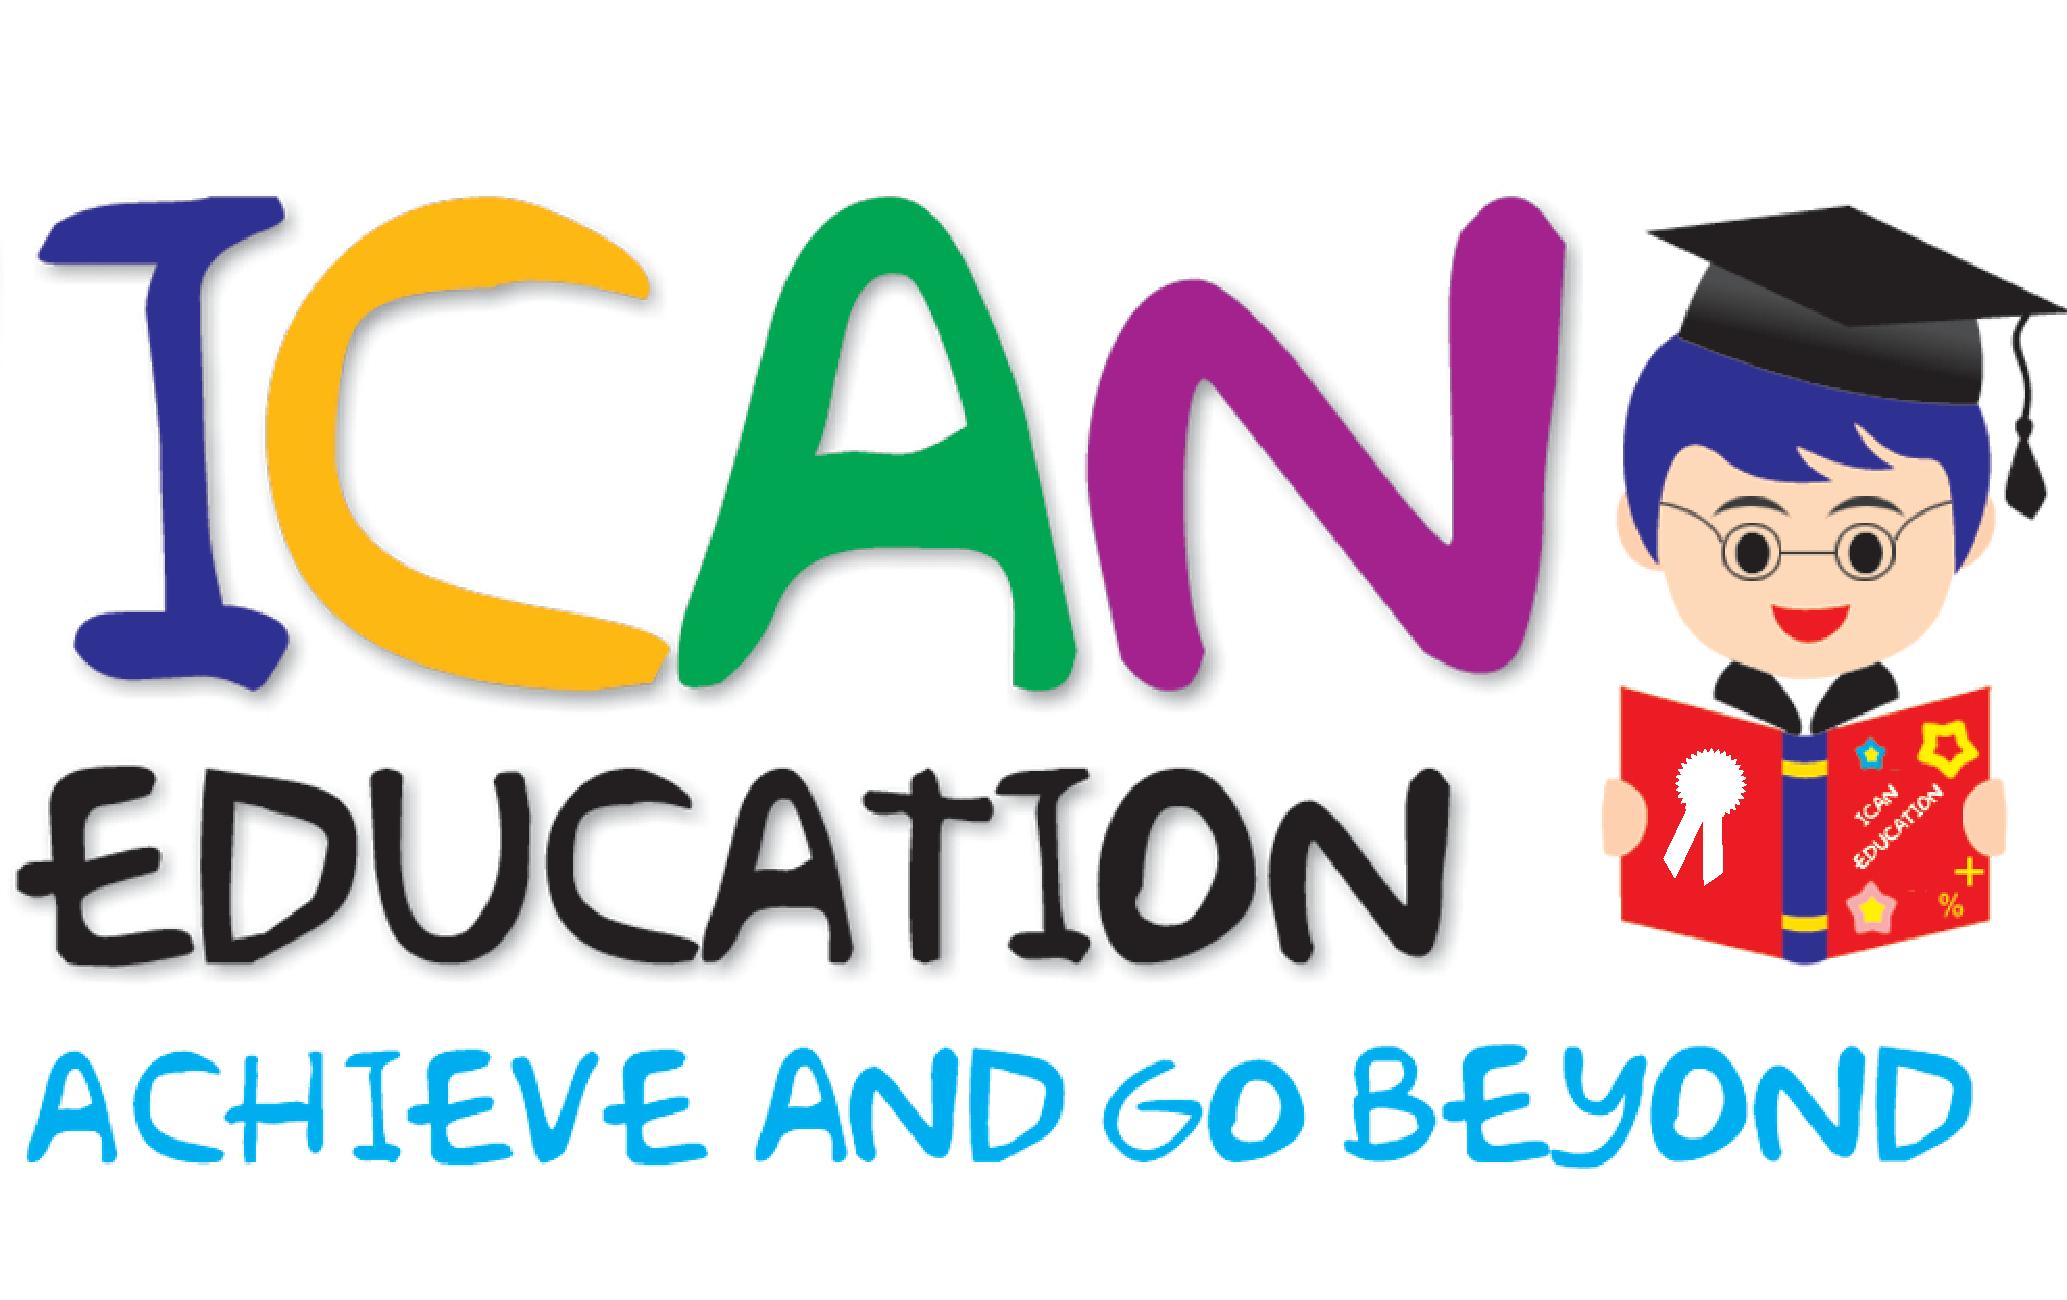 Download this Ican Education Children Franchise picture